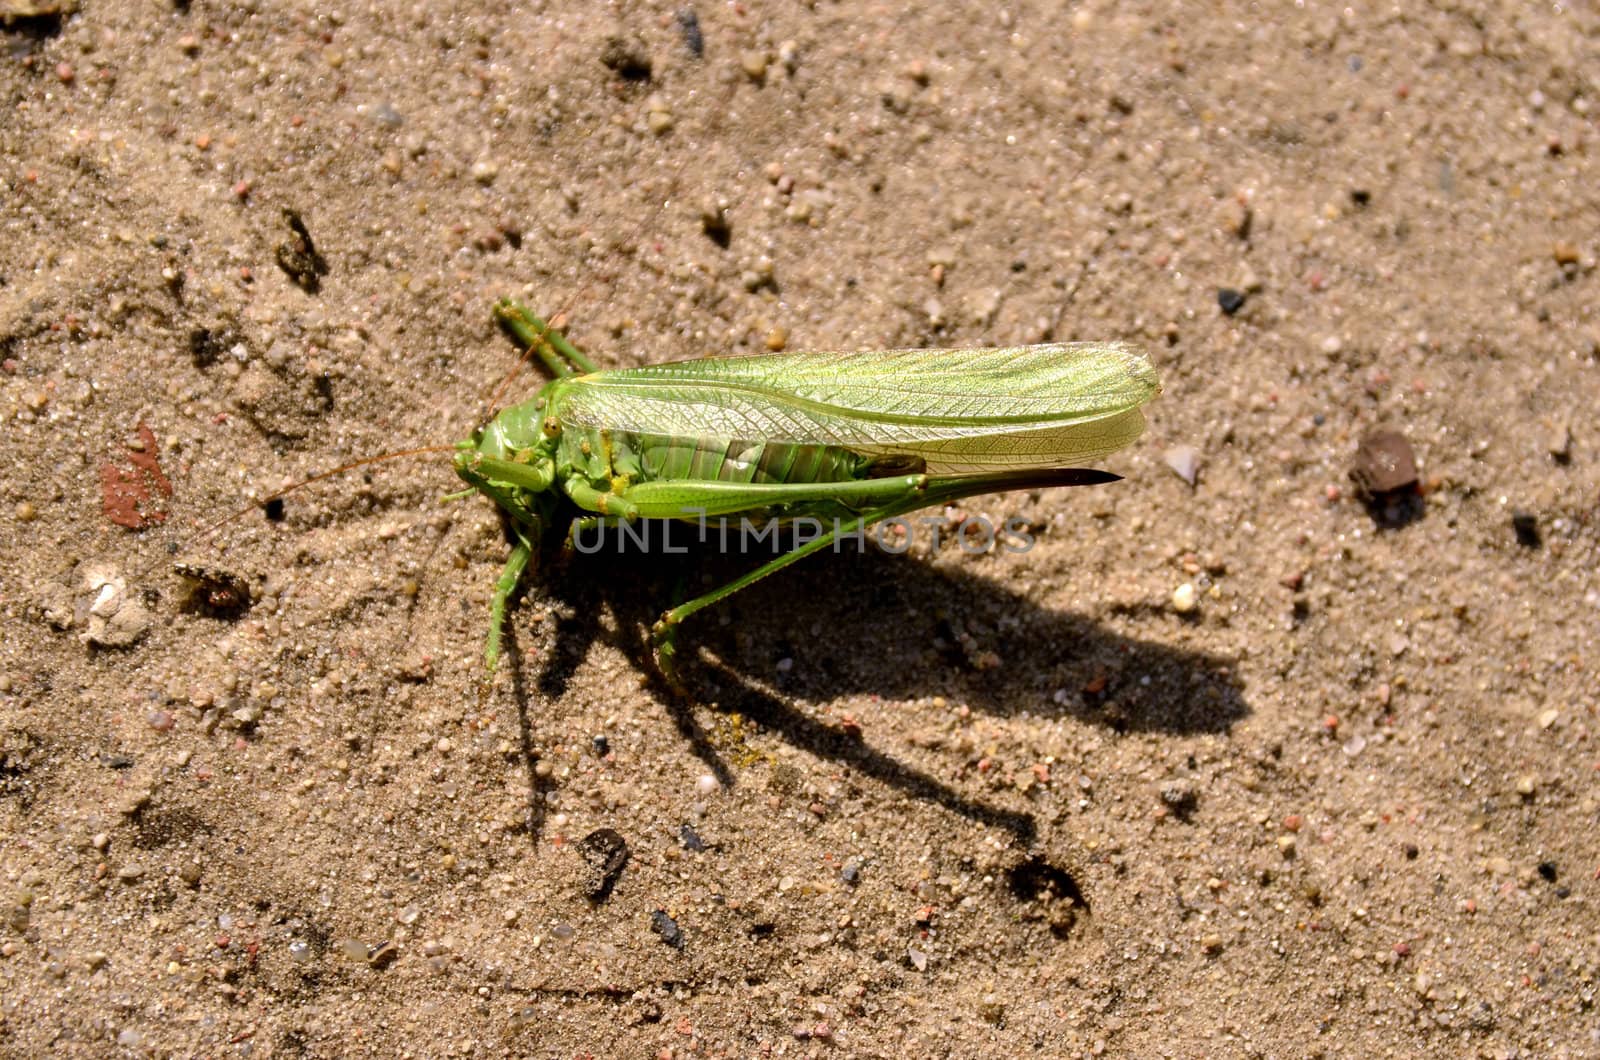 This photo present cricket dying on the sand.